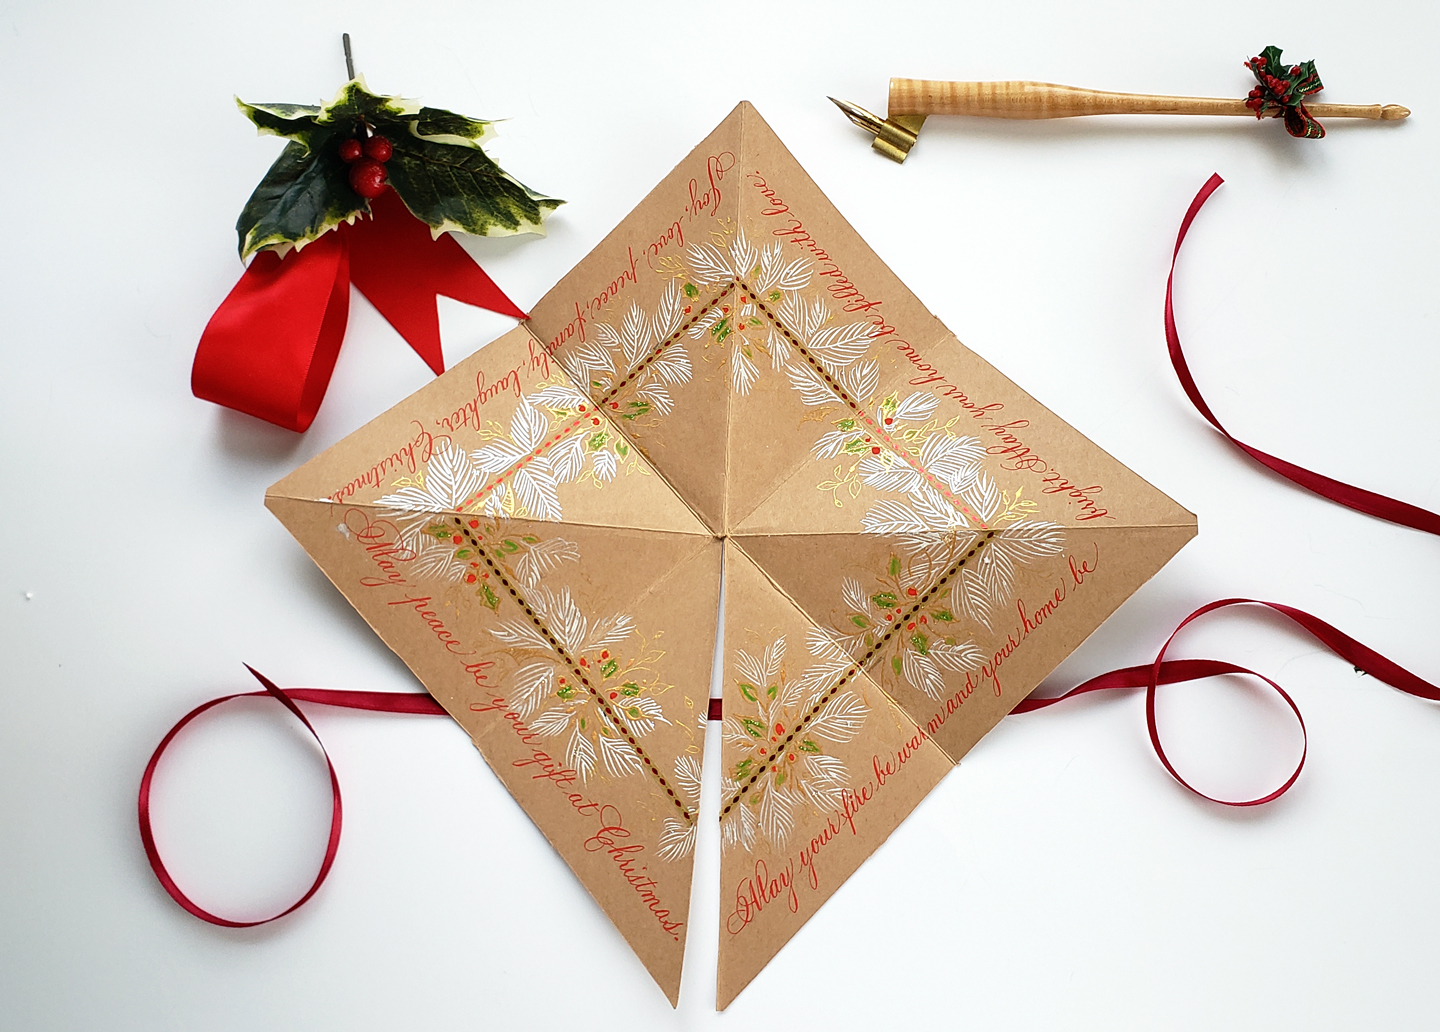 Triangle Fold Holiday Card Tutorial by Phyllis Macaluso